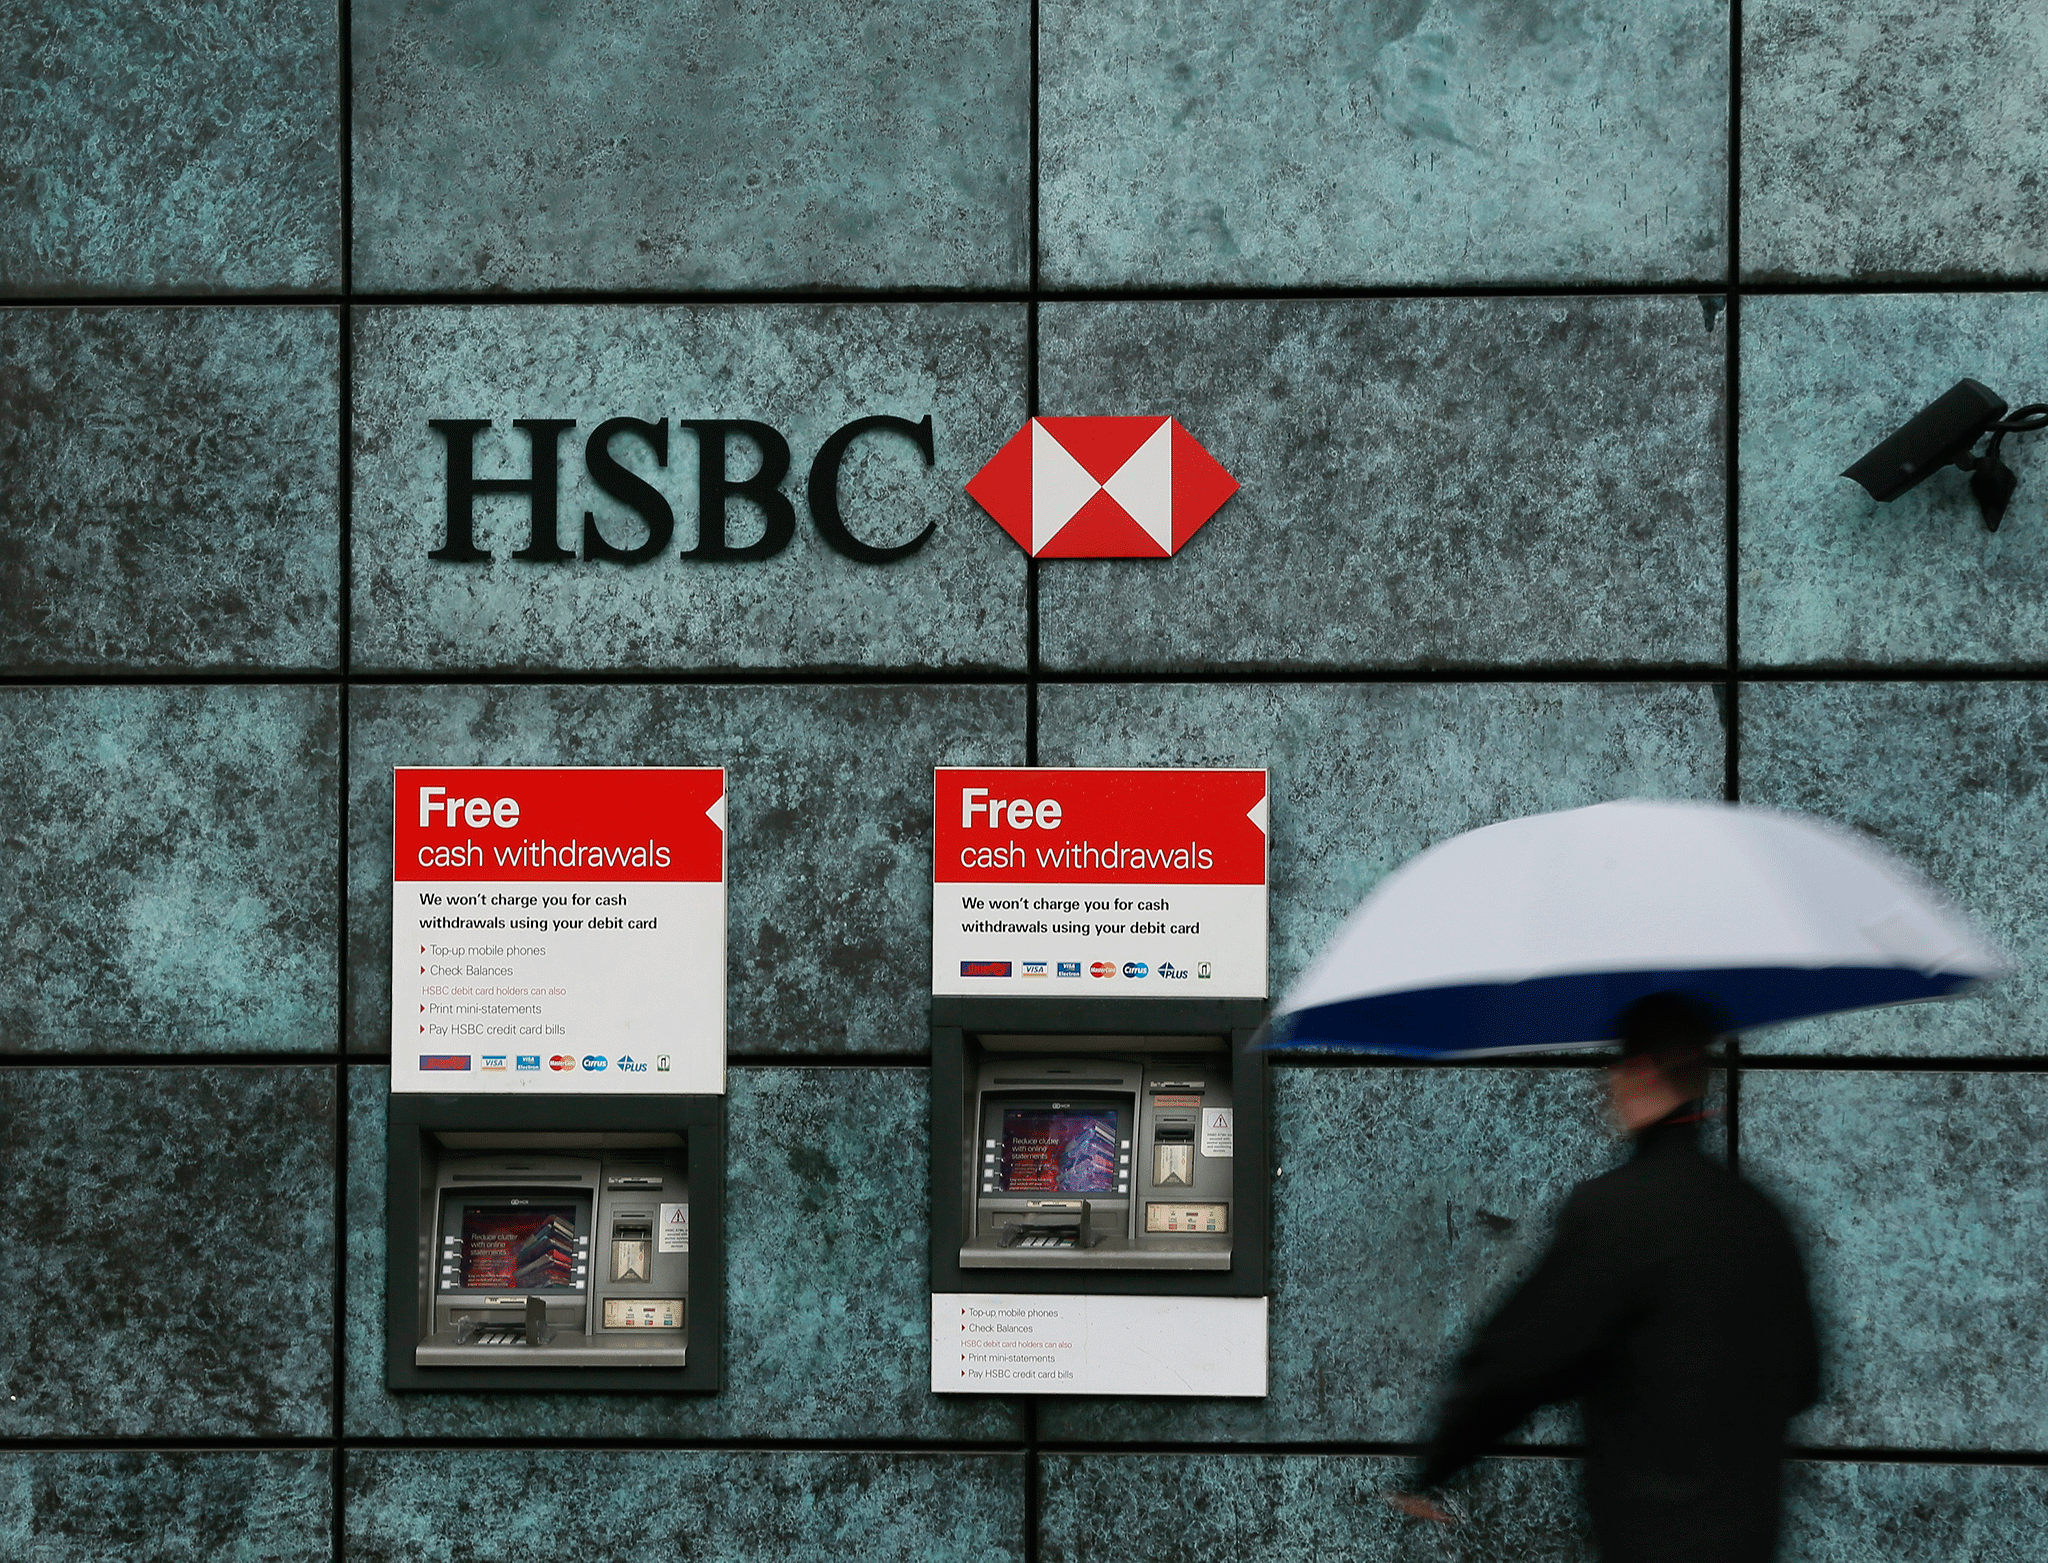 The closures come as the UK’s largest high street banks shrink their branch networks